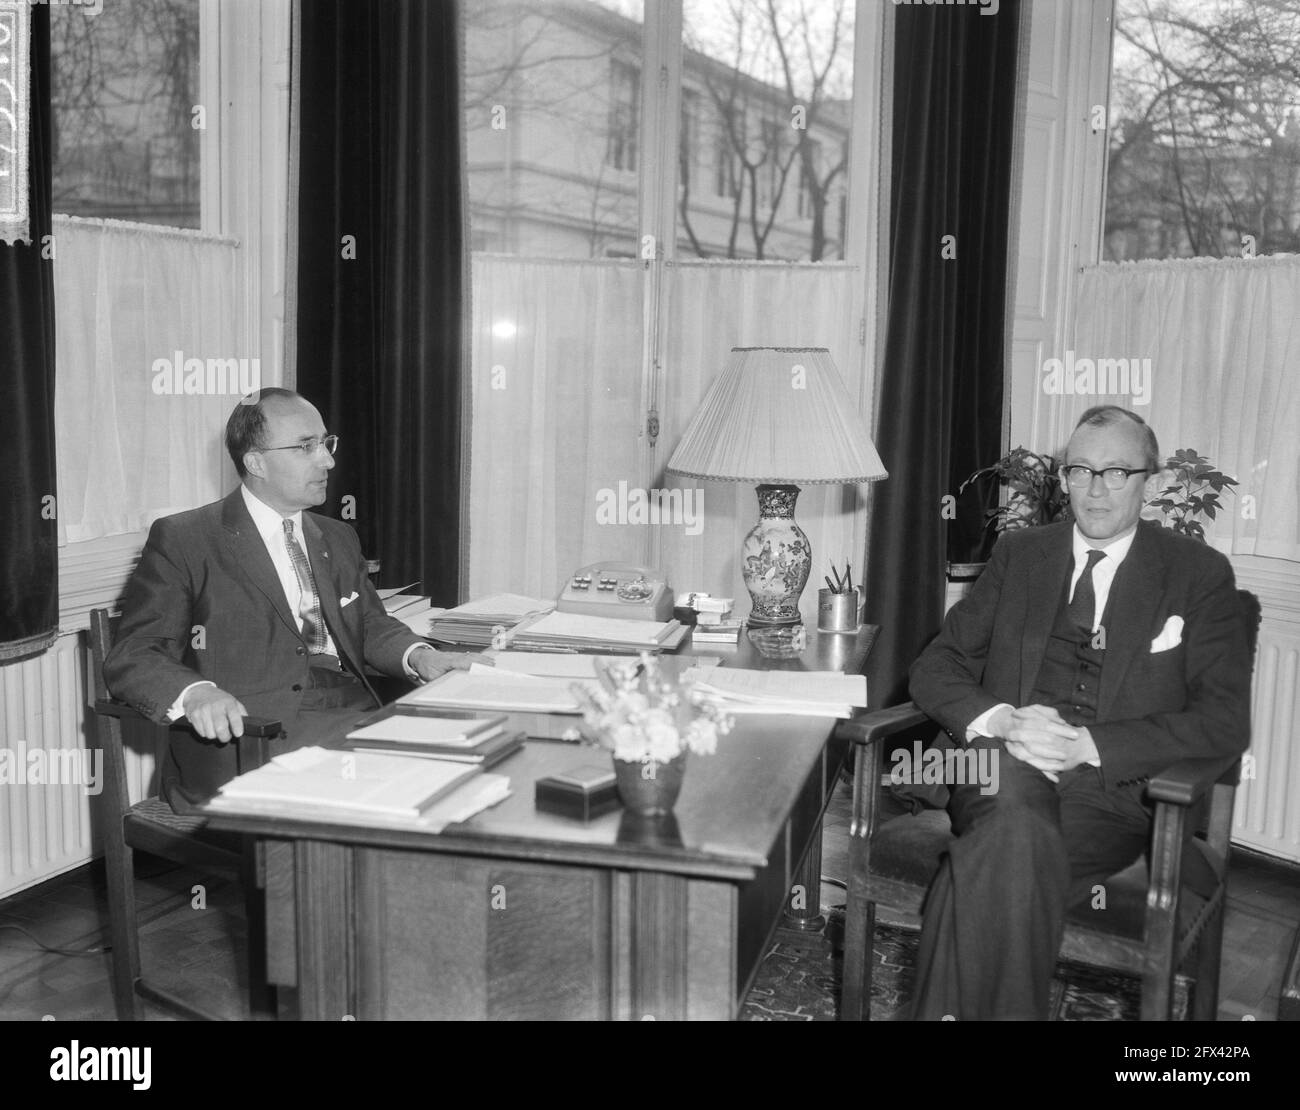 The Cabinet Crisis, Mr. Cals and Minister Witteveen, March 17, 1965, KABINETSCRIS, The Netherlands, 20th century press agency photo, news to remember, documentary, historic photography 1945-1990, visual stories, human history of the Twentieth Century, capturing moments in time Stock Photo